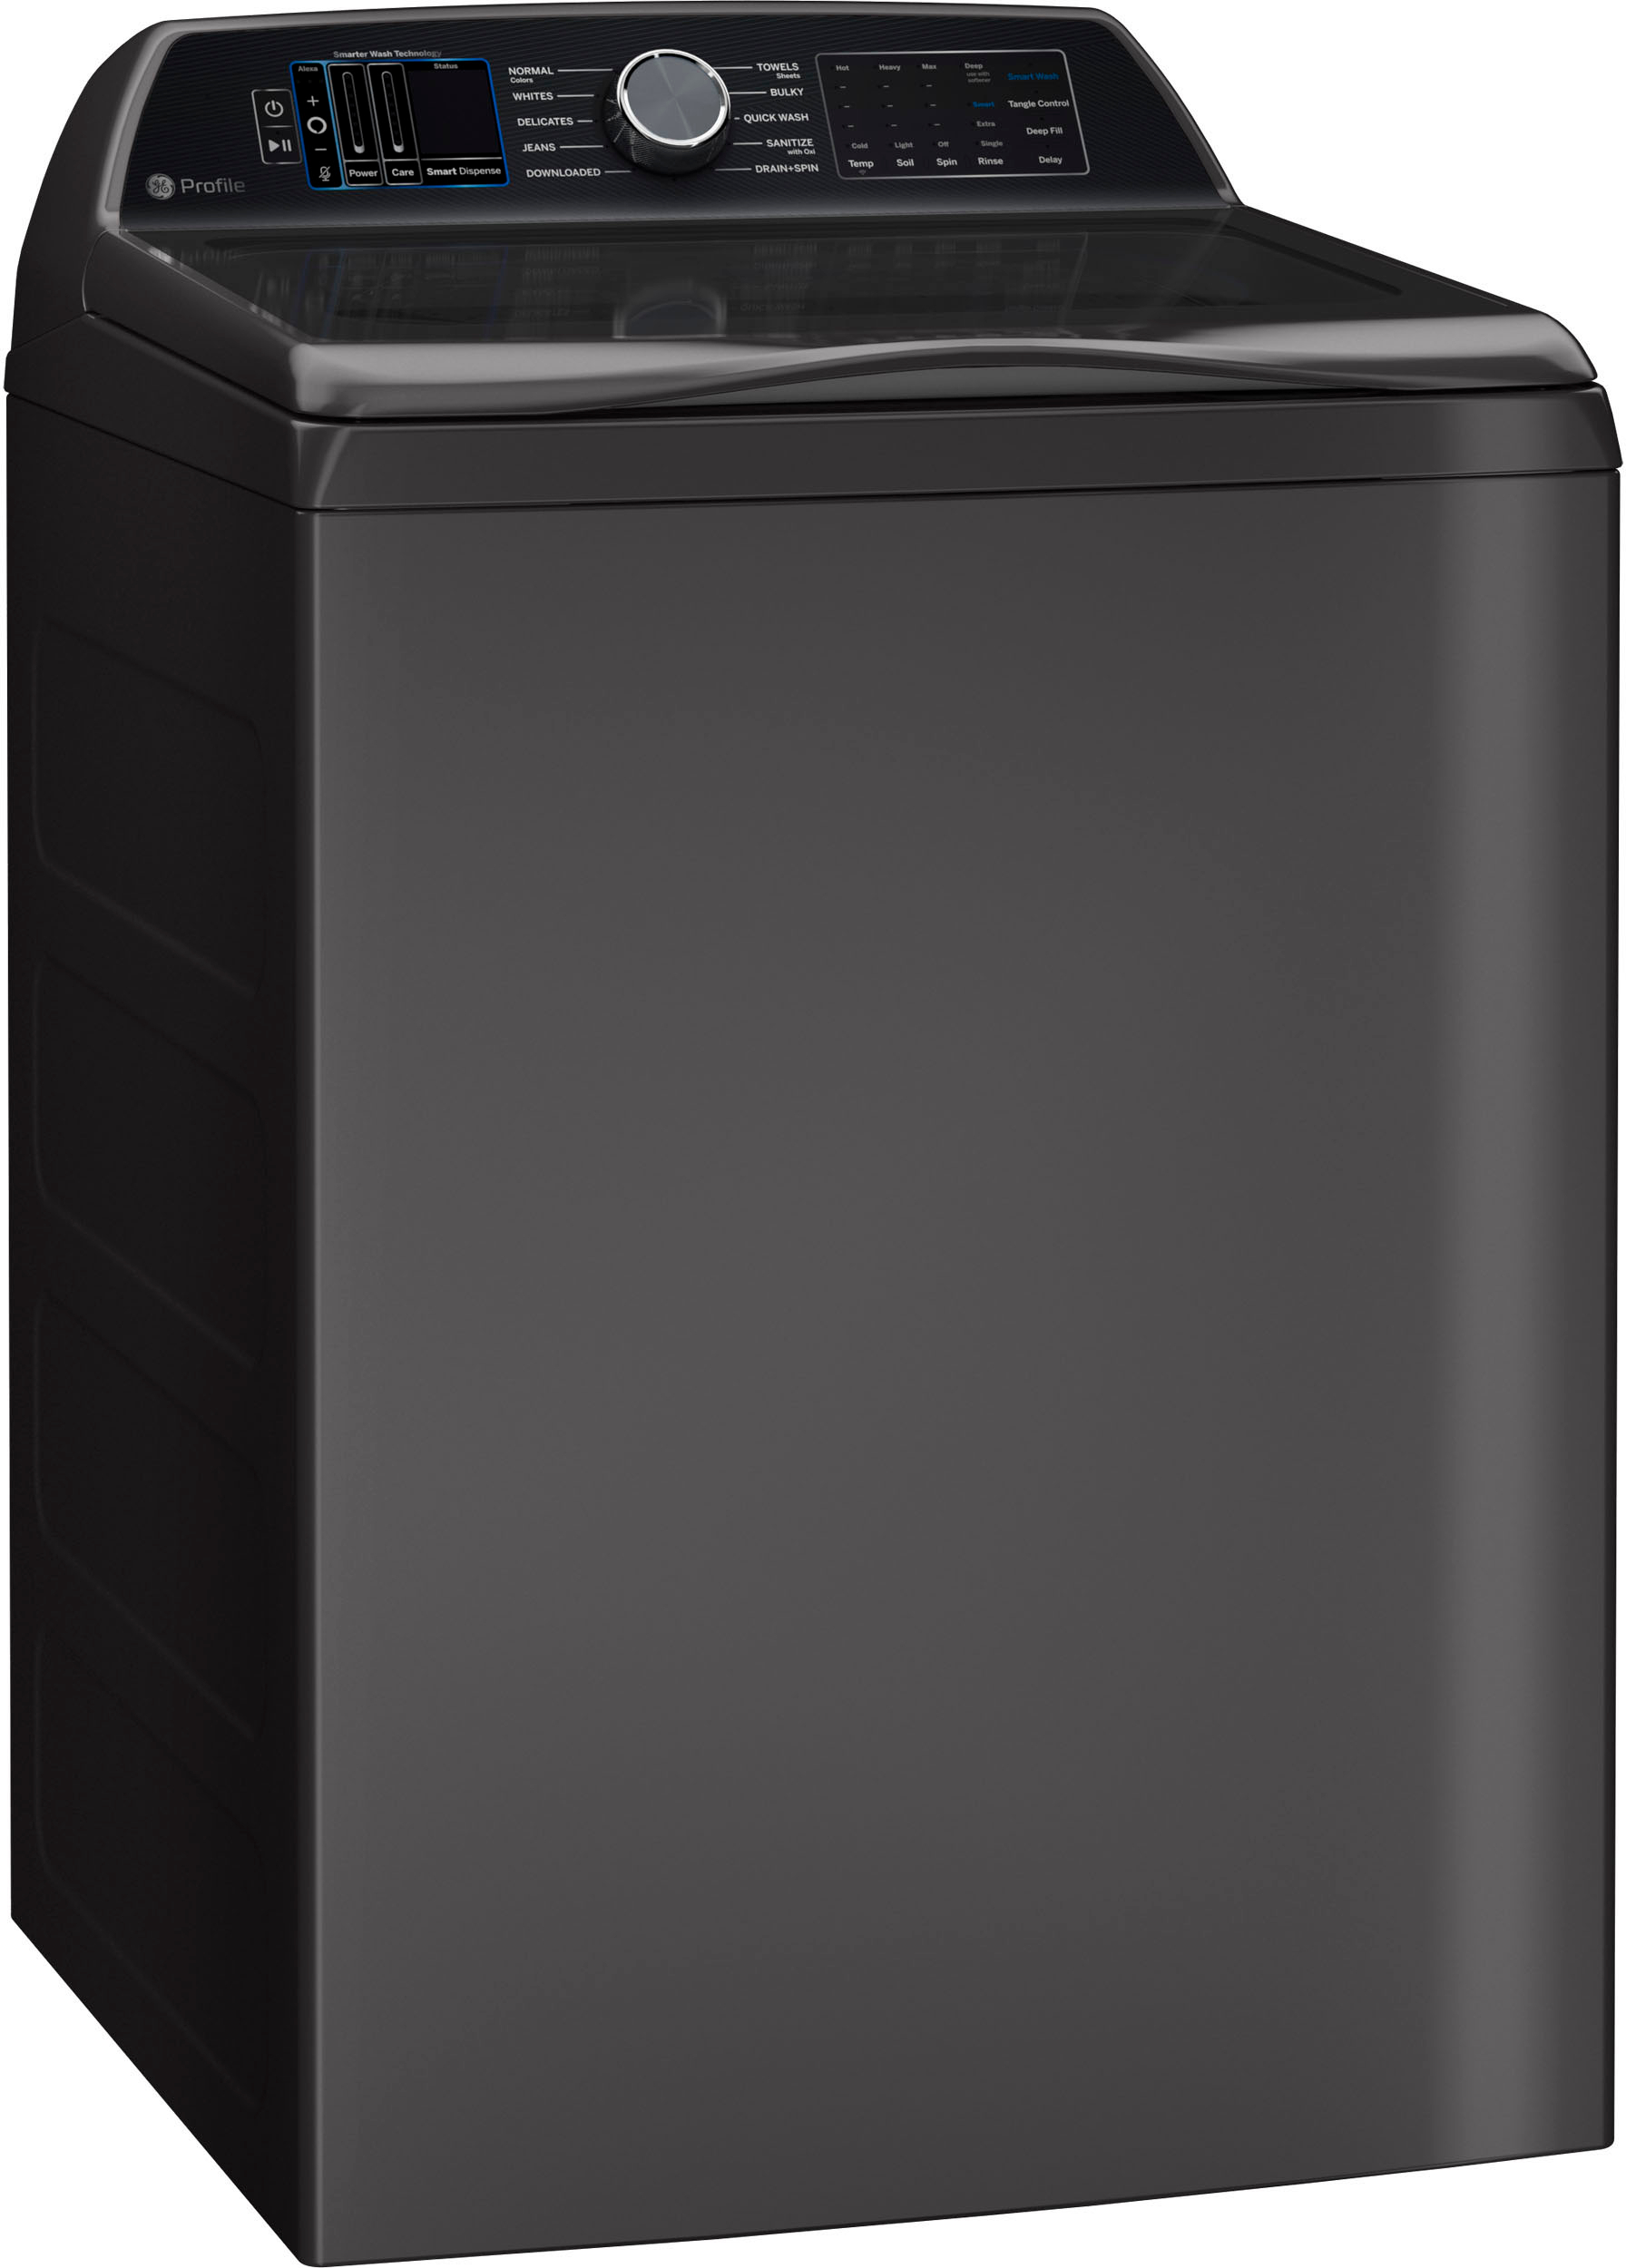 Angle View: GE Profile - 5.3 Cu. Ft. High Efficiency Top Load Washer with Smarter Wash Technology, Easier Reach & Microban Technology - Diamond Gray